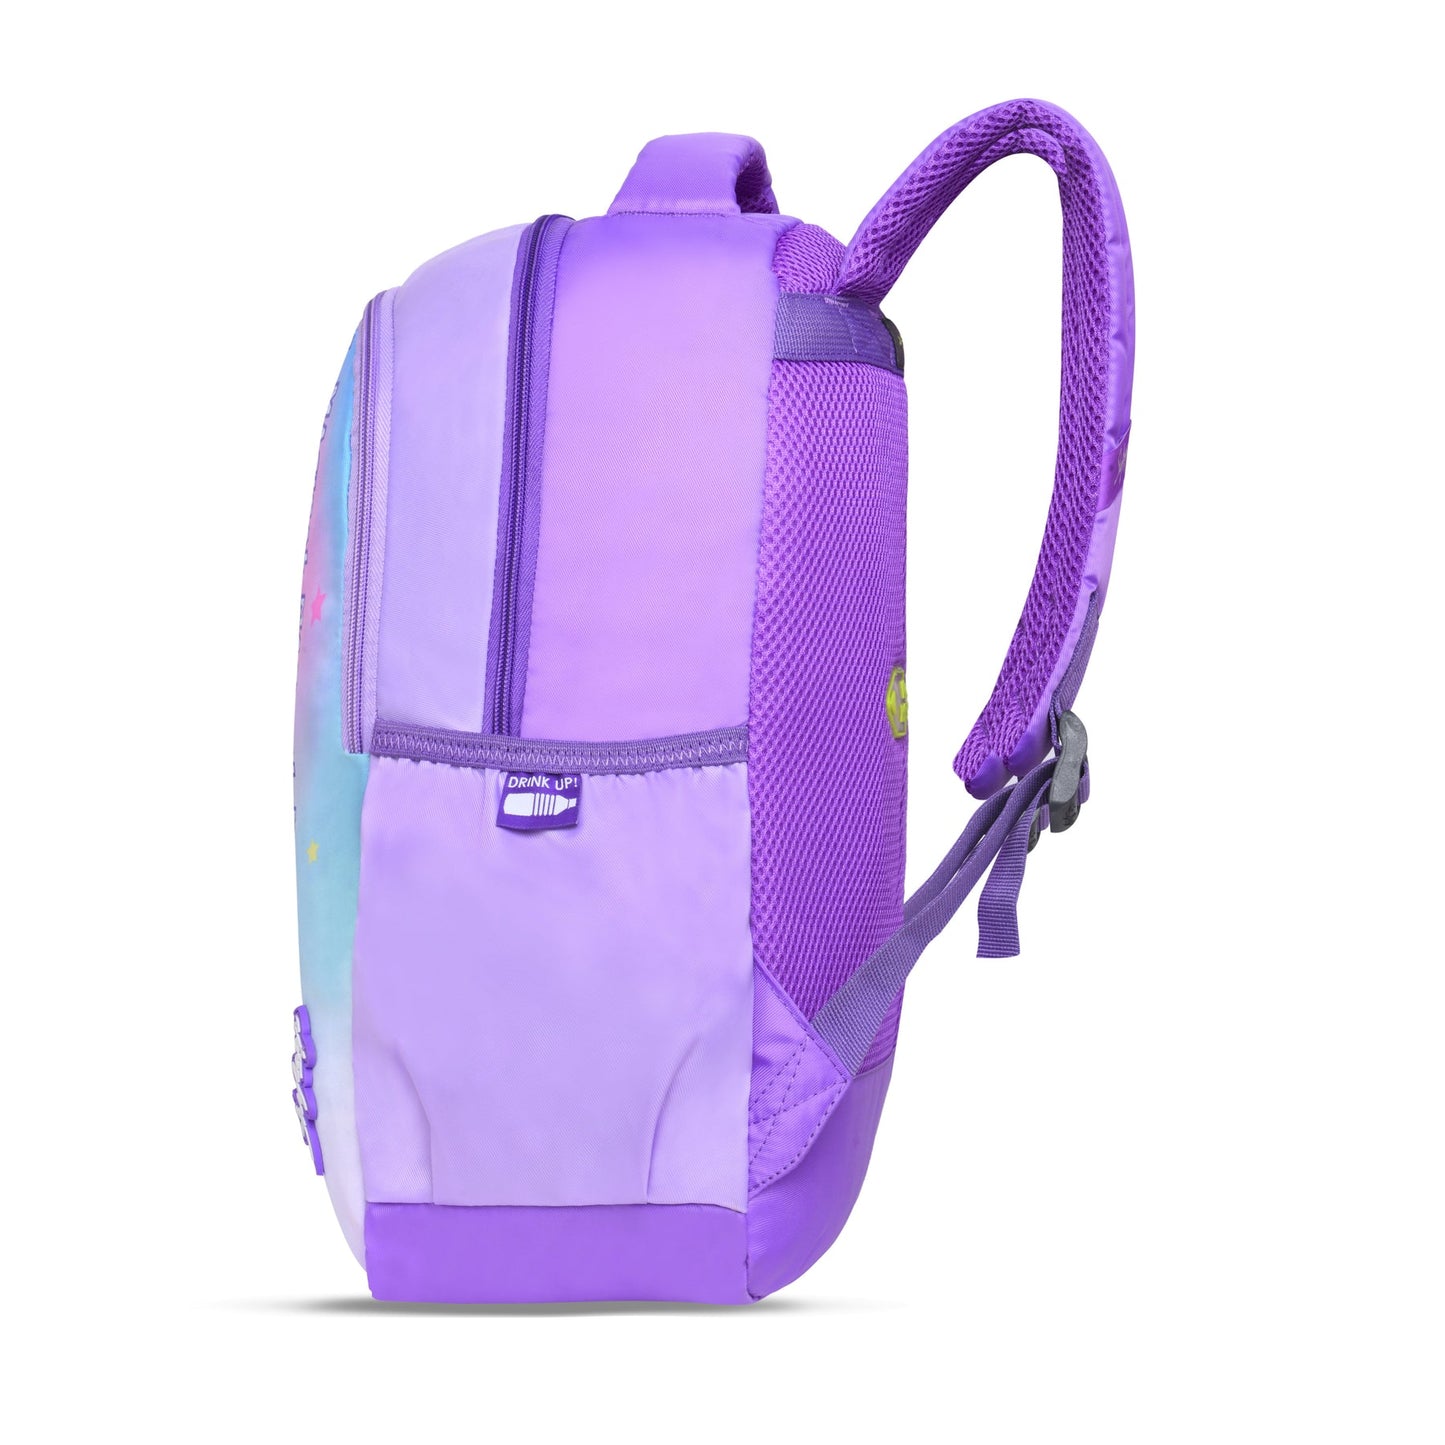 Skybags Bubbles Unicorn 04 18L Backpack